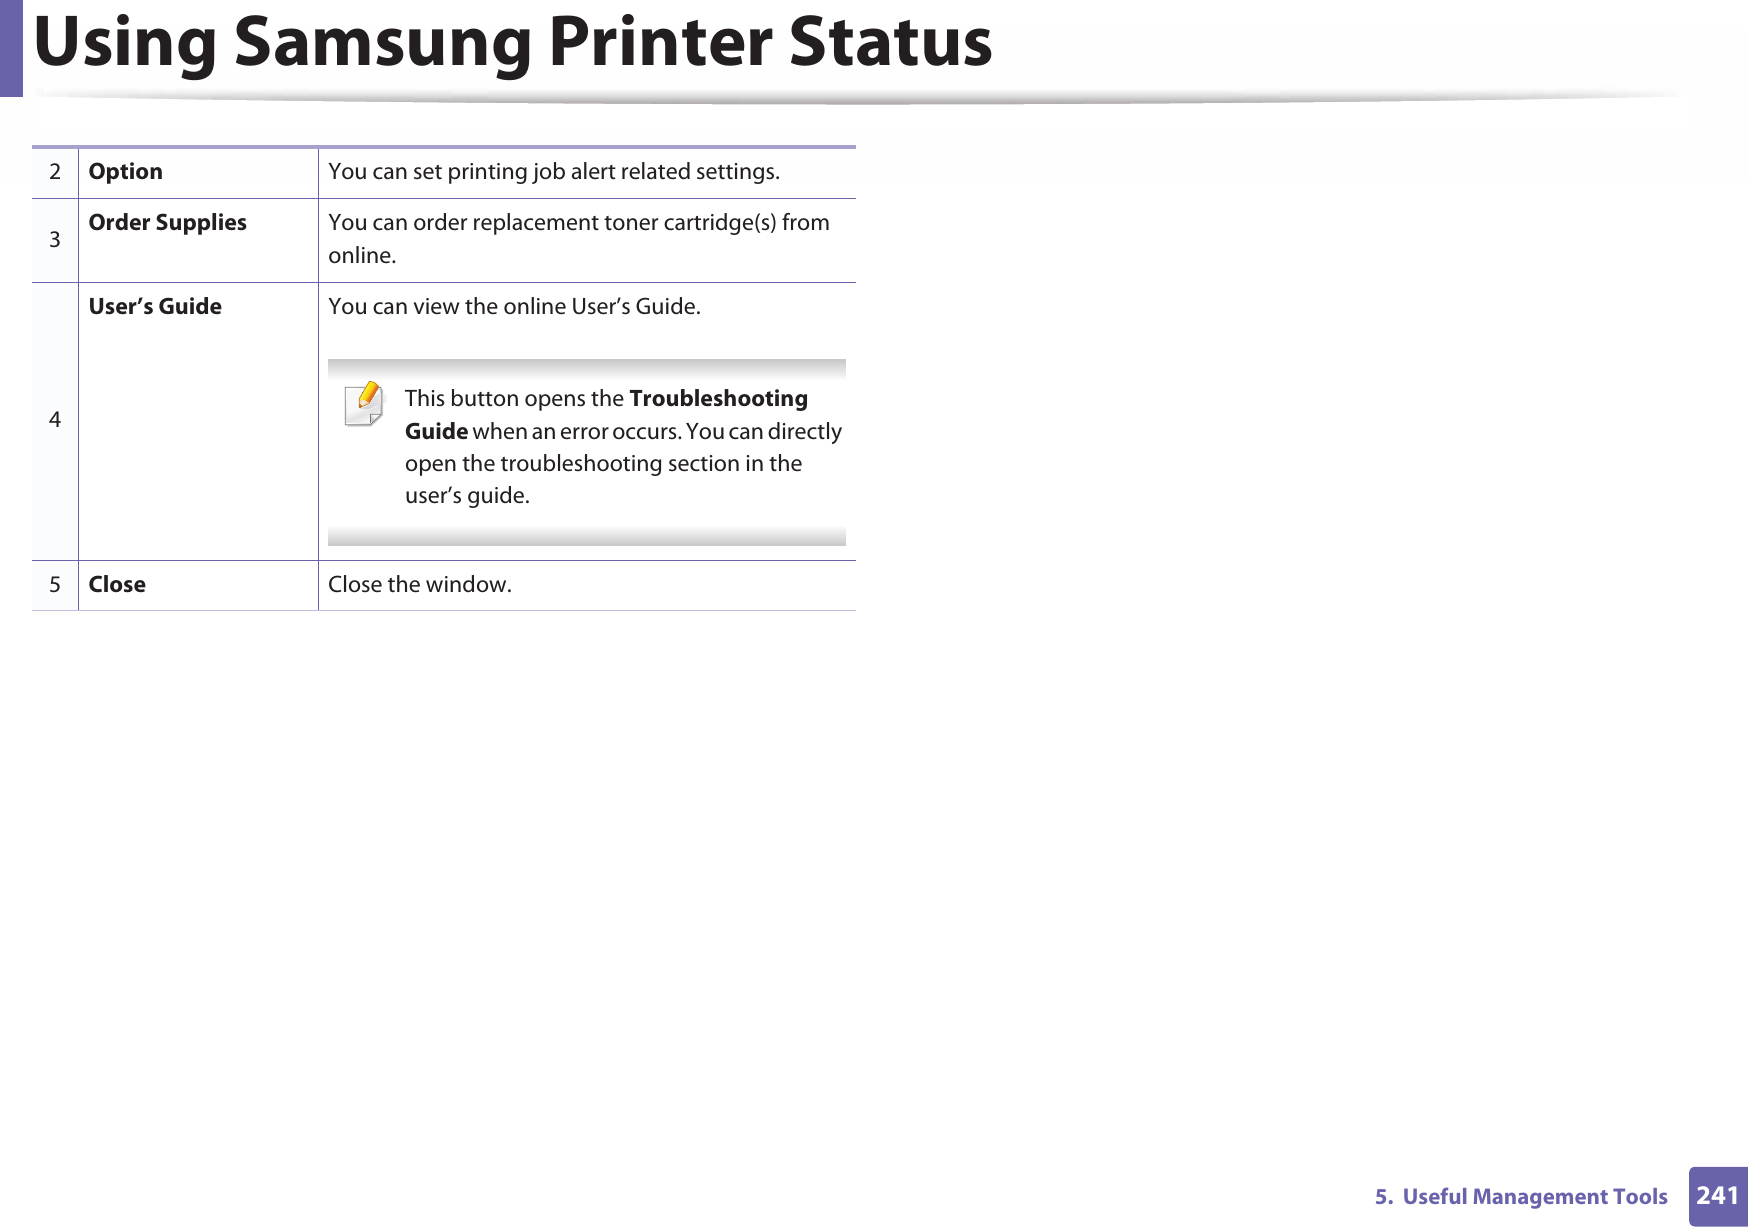 Using Samsung Printer Status2415.  Useful Management Tools2Option You can set printing job alert related settings. 3Order Supplies You can order replacement toner cartridge(s) from online.4User’s Guide You can view the online User’s Guide. This button opens the Troubleshooting Guide when an error occurs. You can directly open the troubleshooting section in the user’s guide.  5Close Close the window.